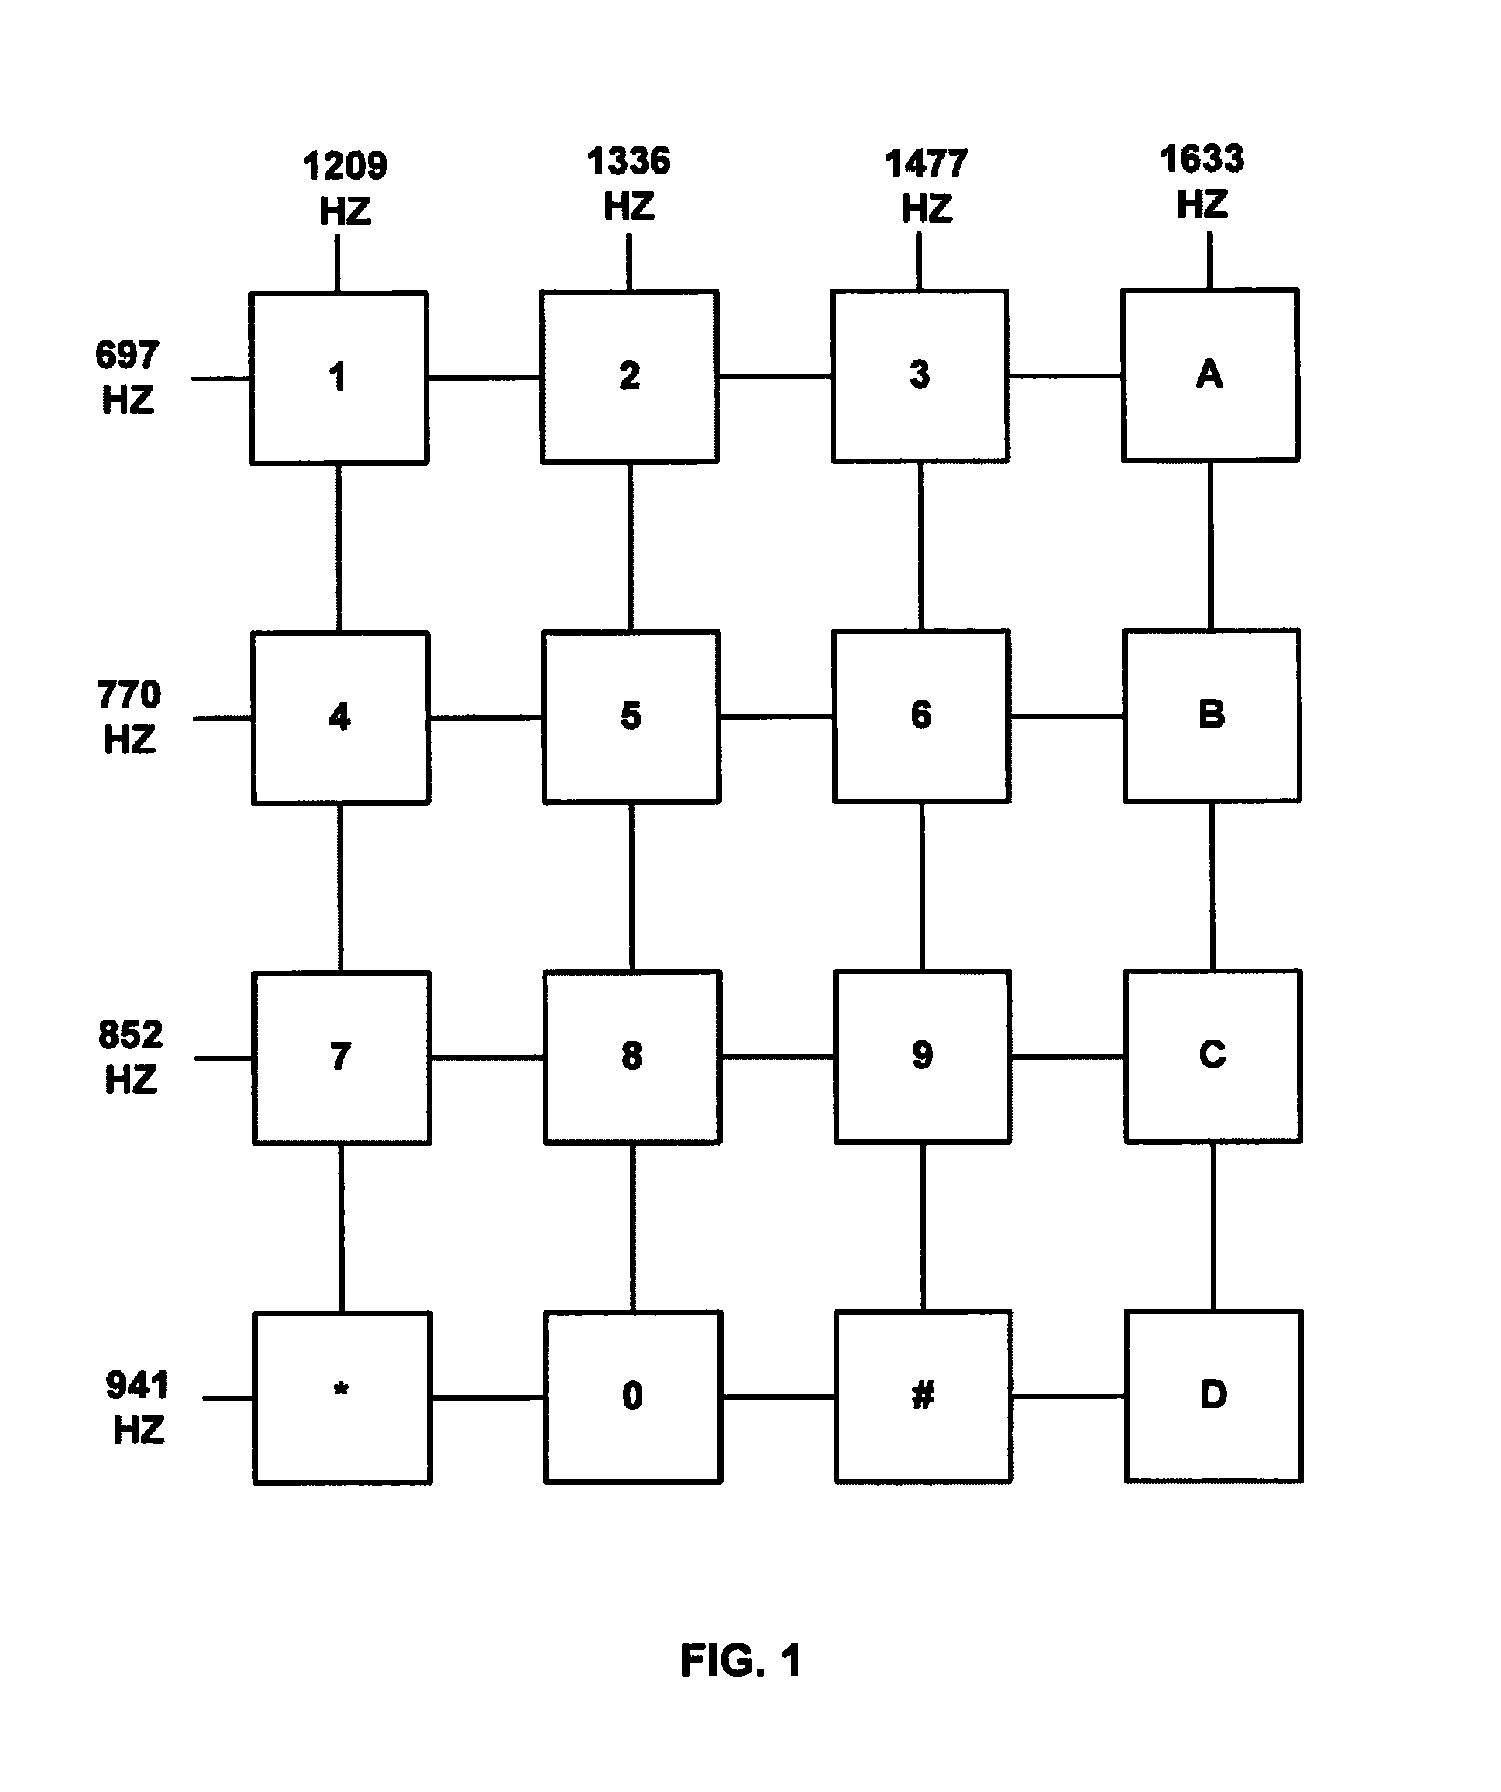 Method and apparatus for evaluating possible 3-way call events